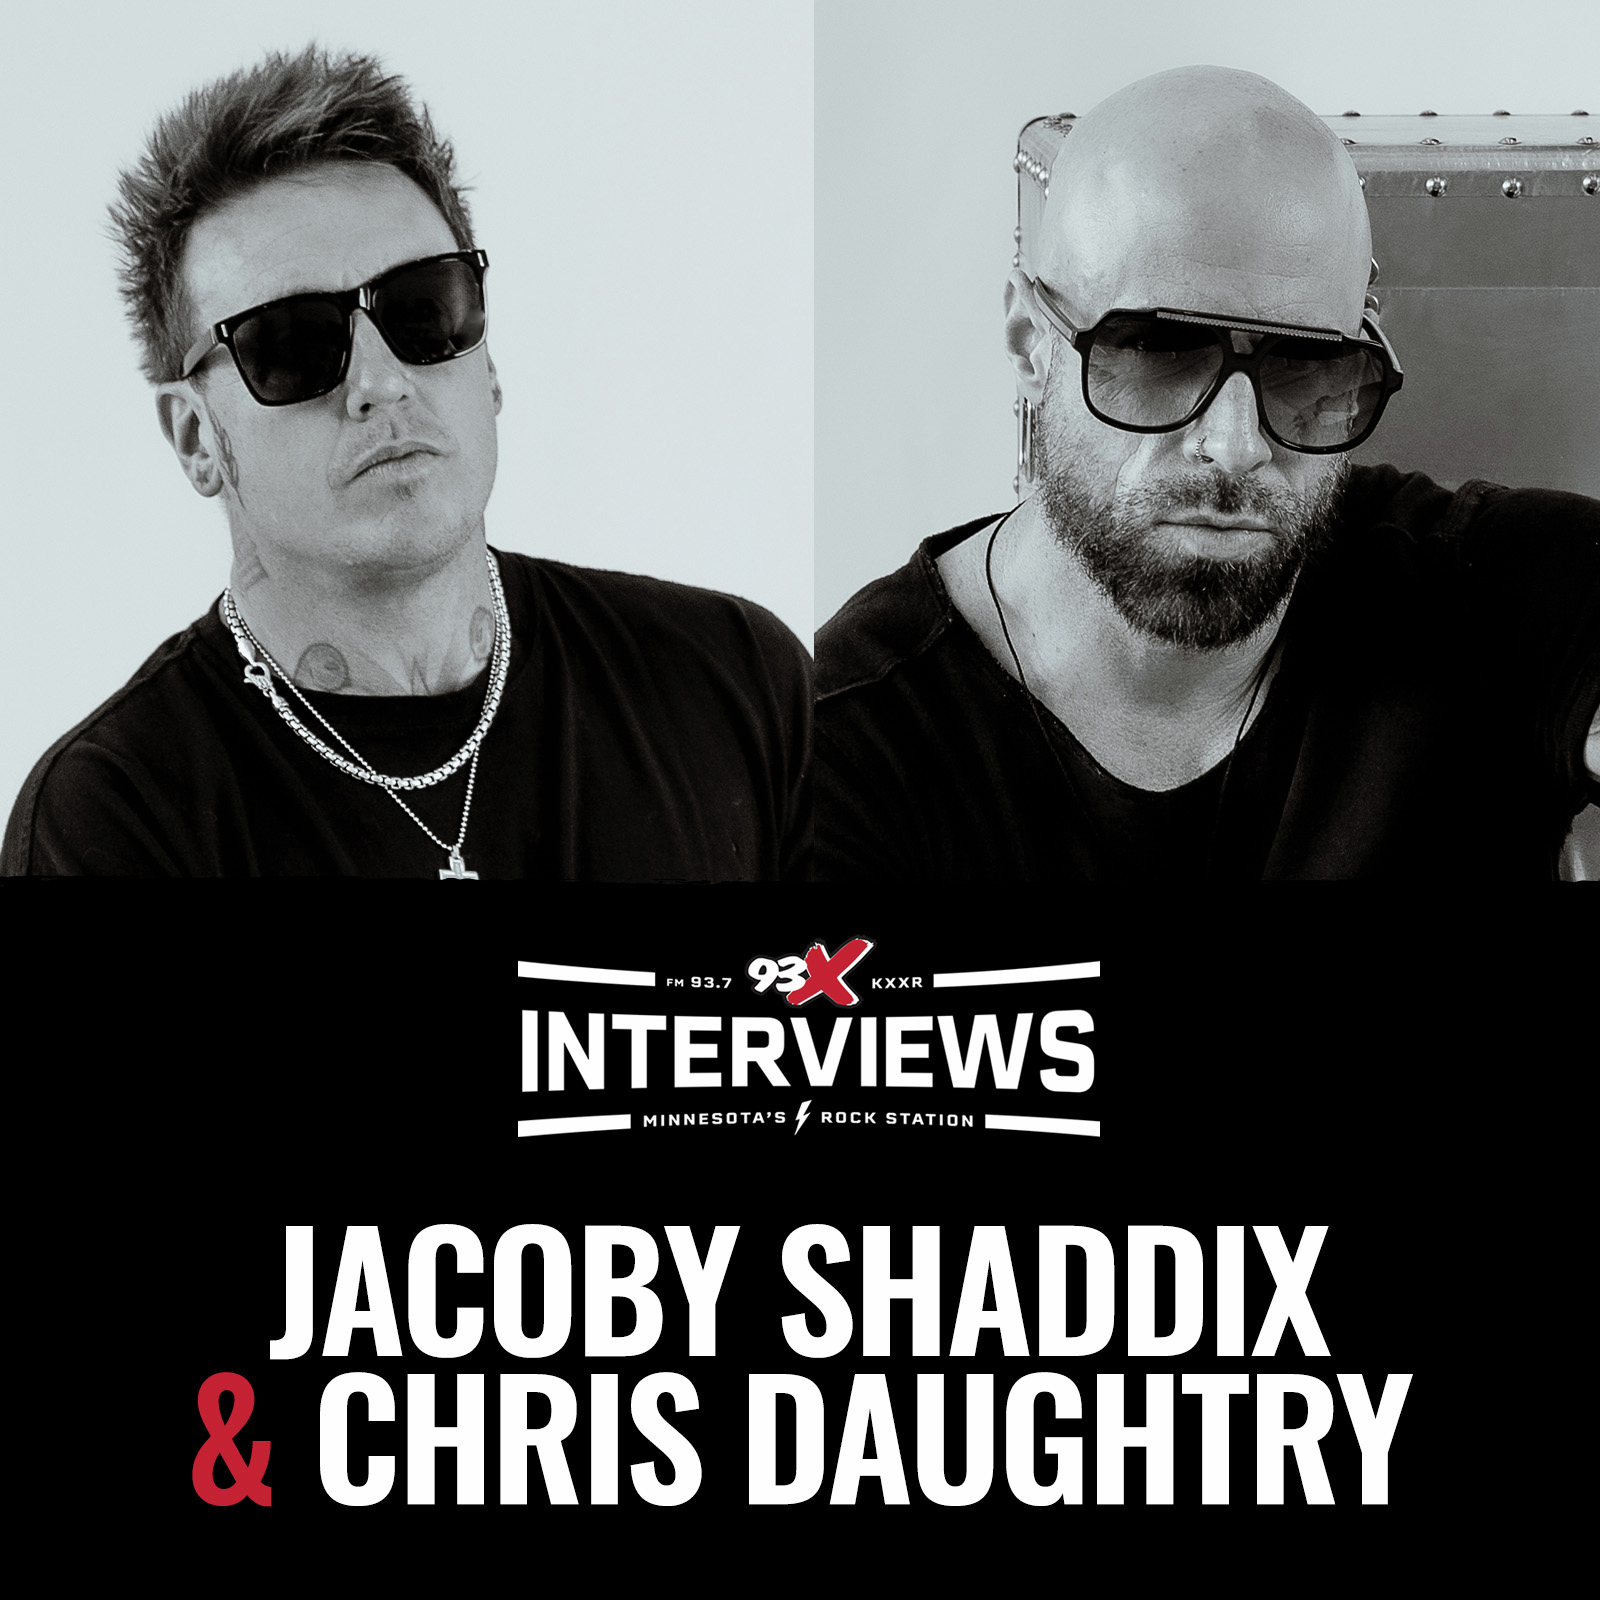 Jacoby Shaddix & Chris Daughtry